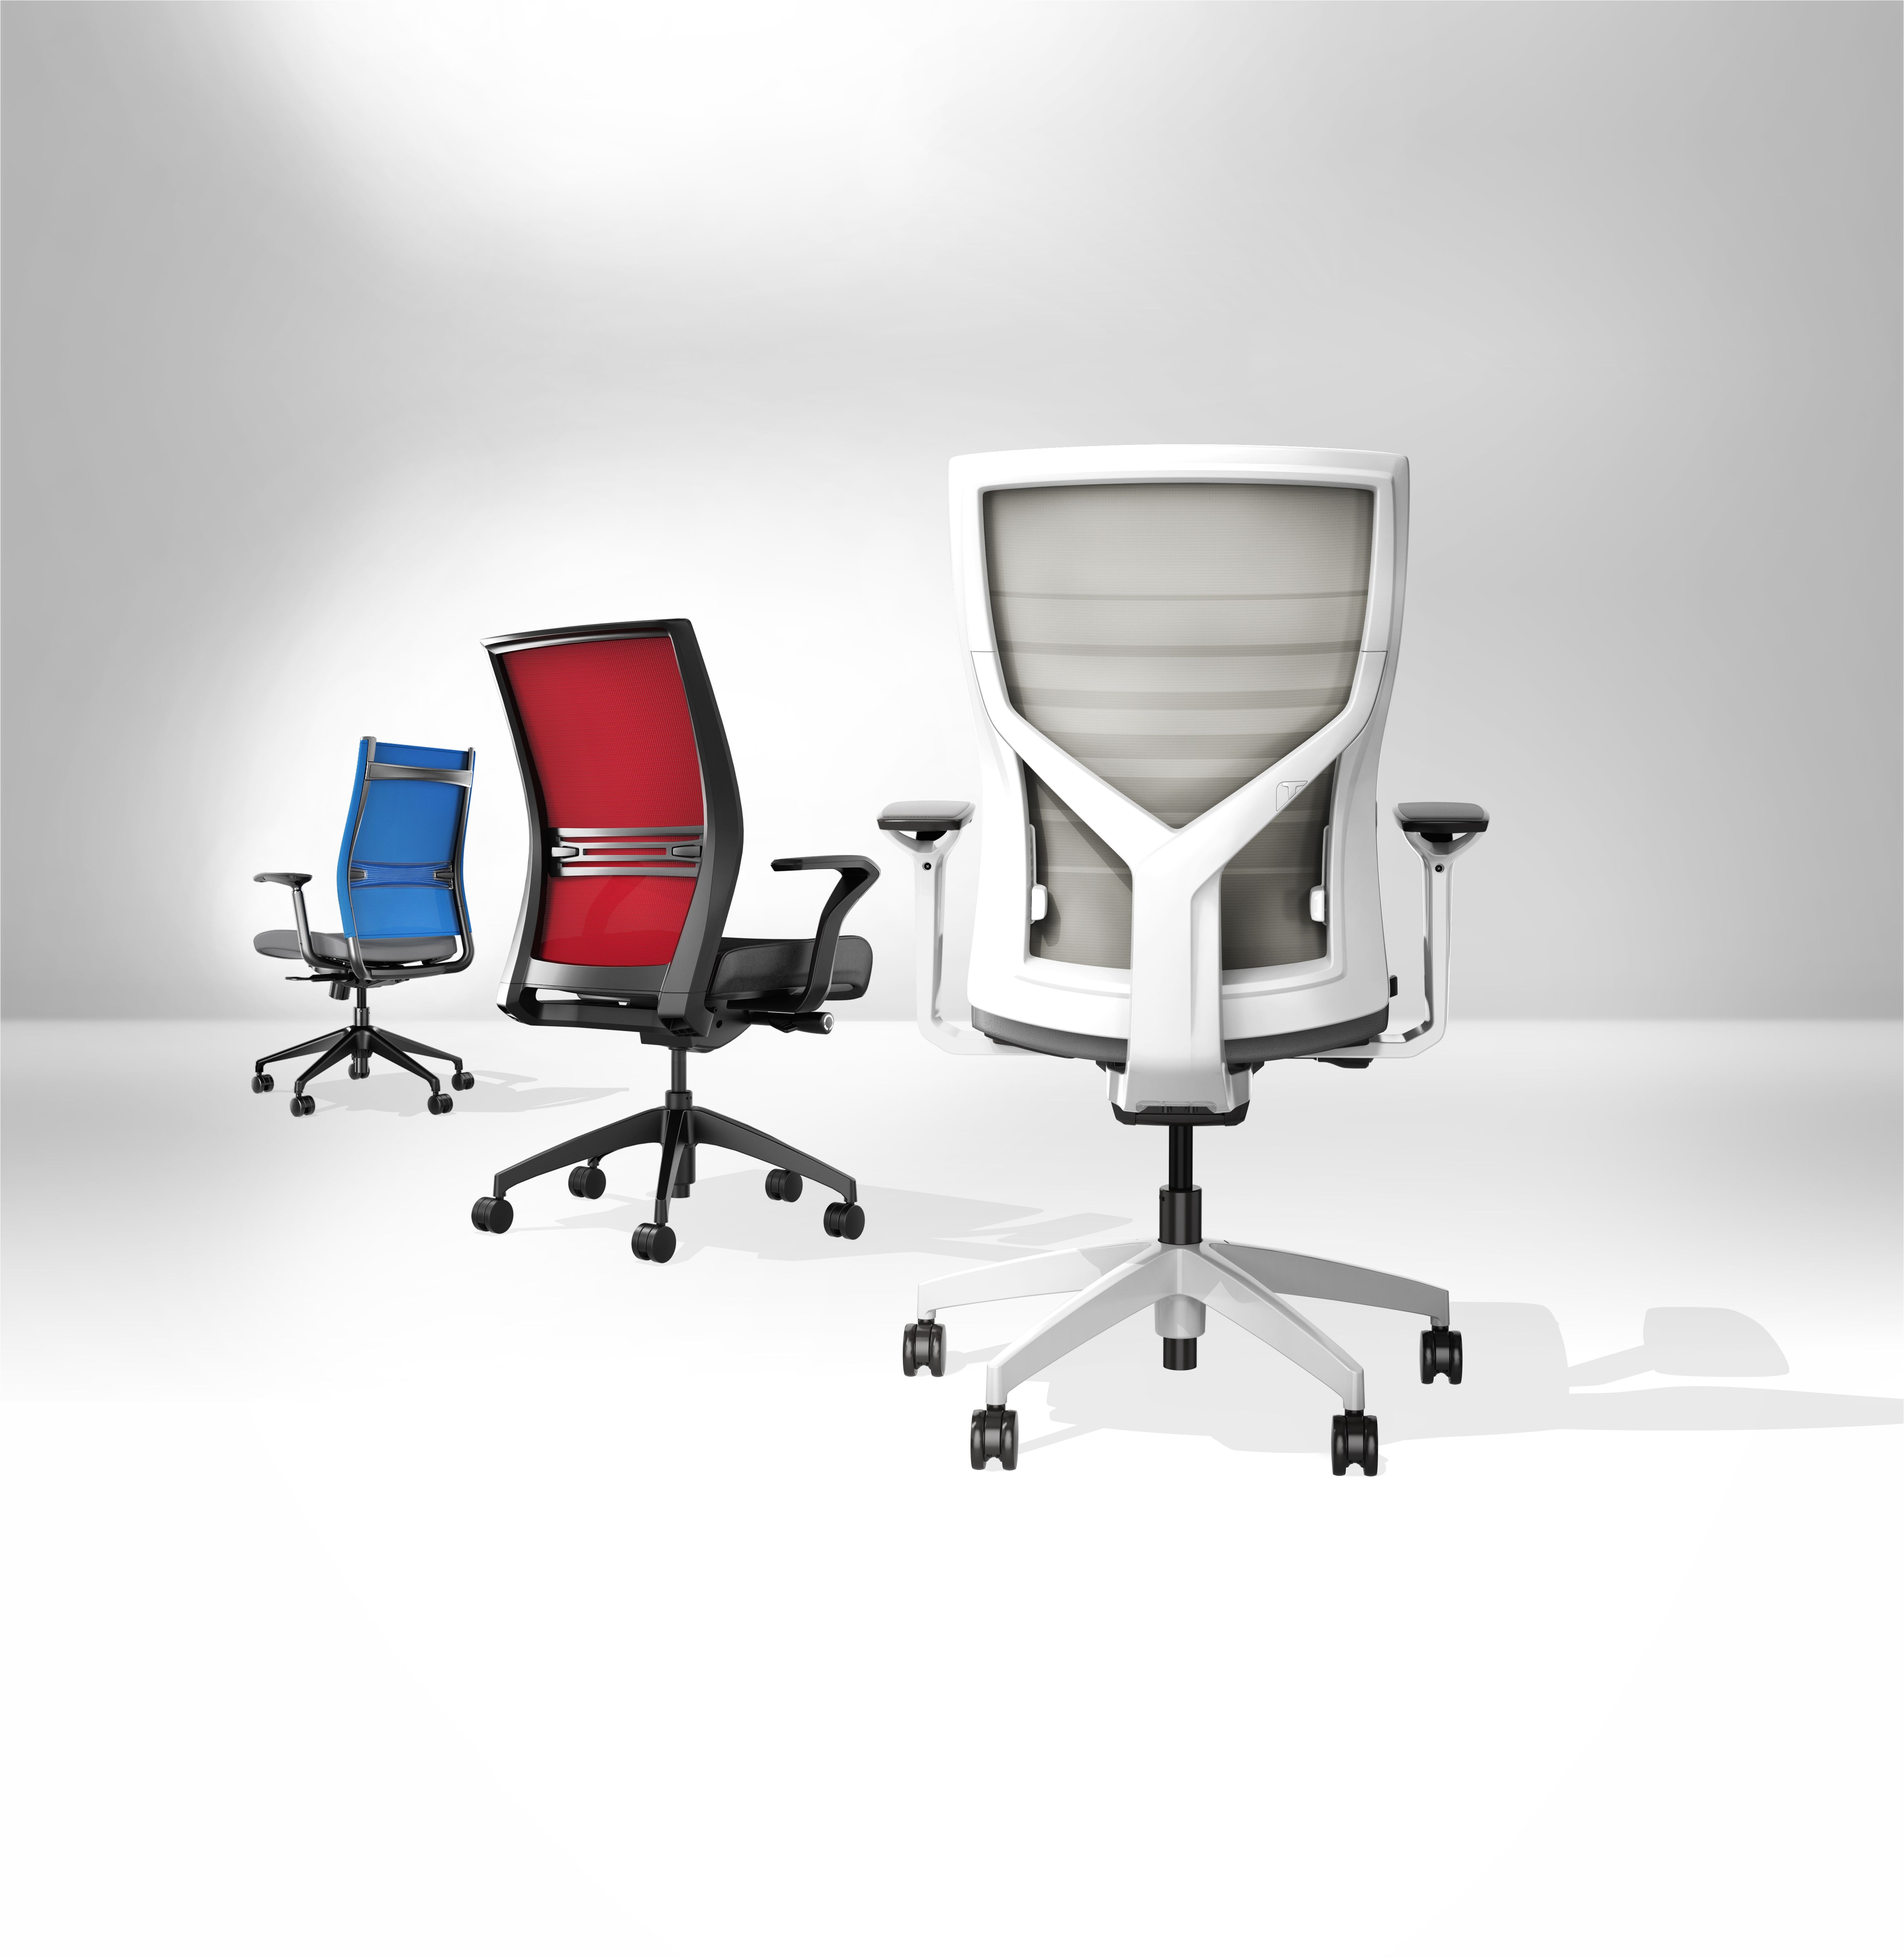 wit amplify torsa sitonit chairs available at cfs